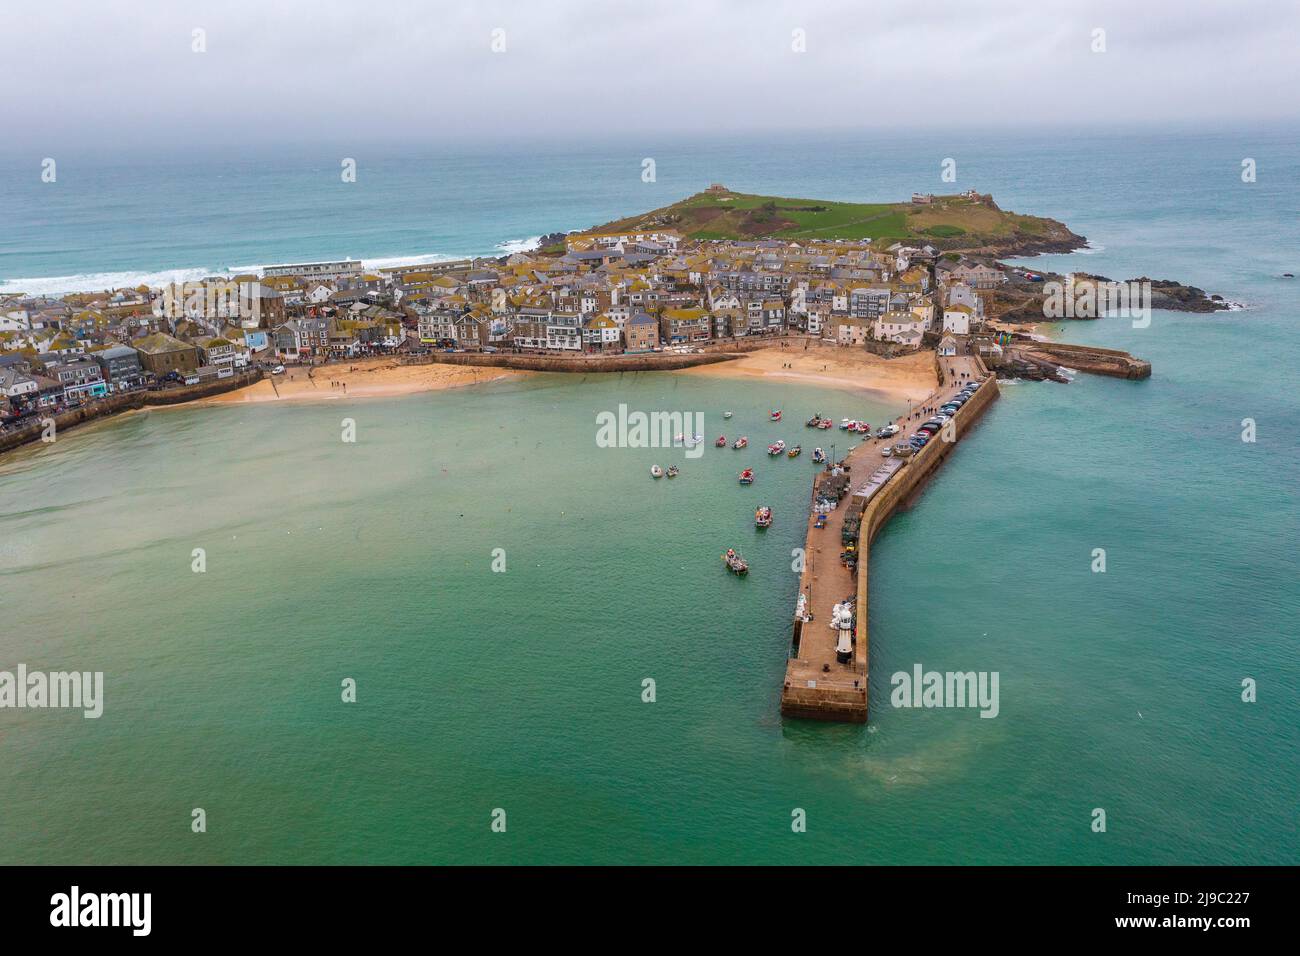 Boats bob in the harbour of this traditional Cornwall seaside town with a lighthouse pier. Stock Photo